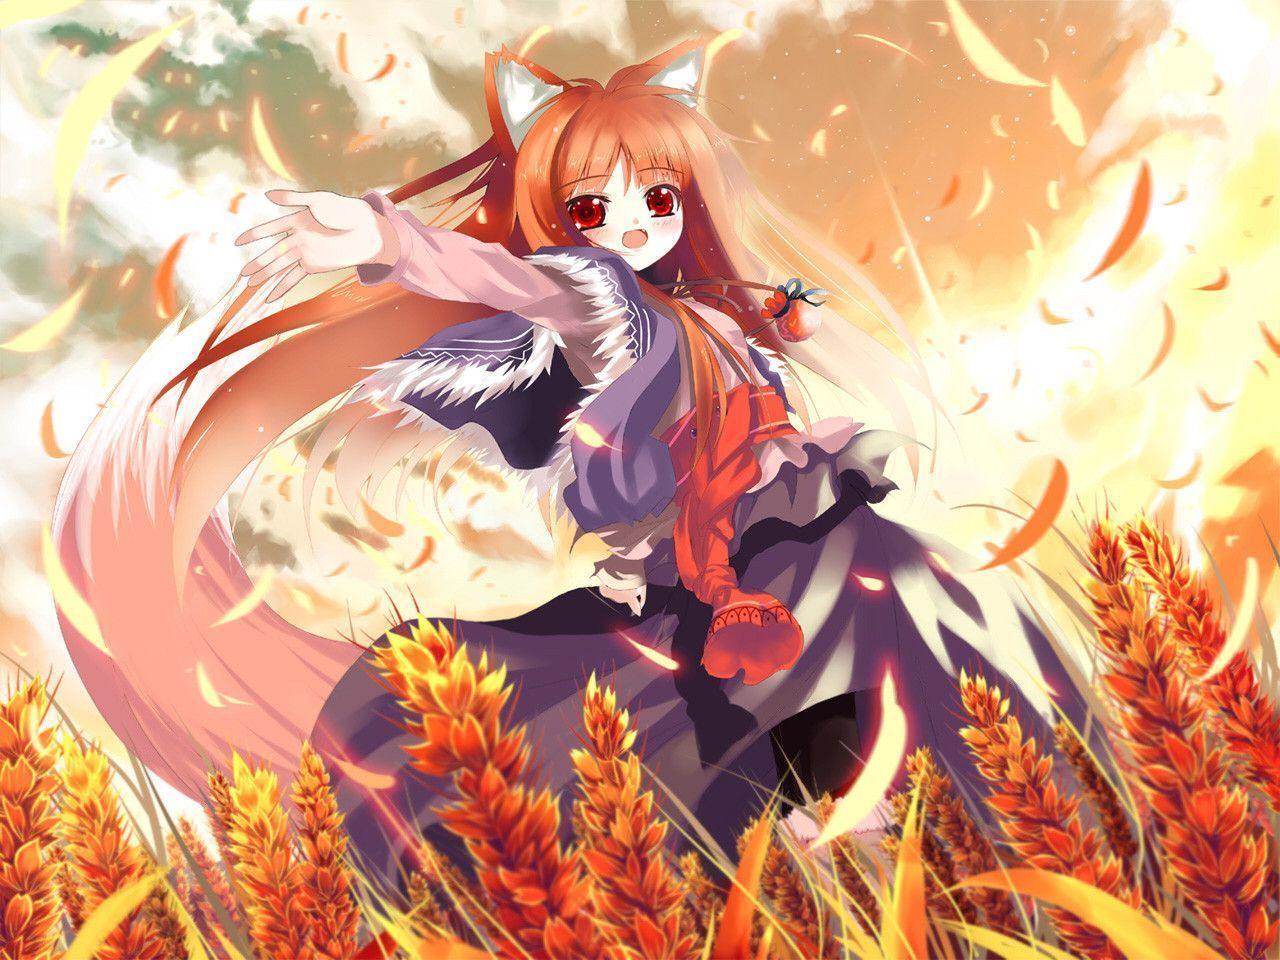 Download Muryou Anime Spice And Wolf Horo Wallpaper 1280x960